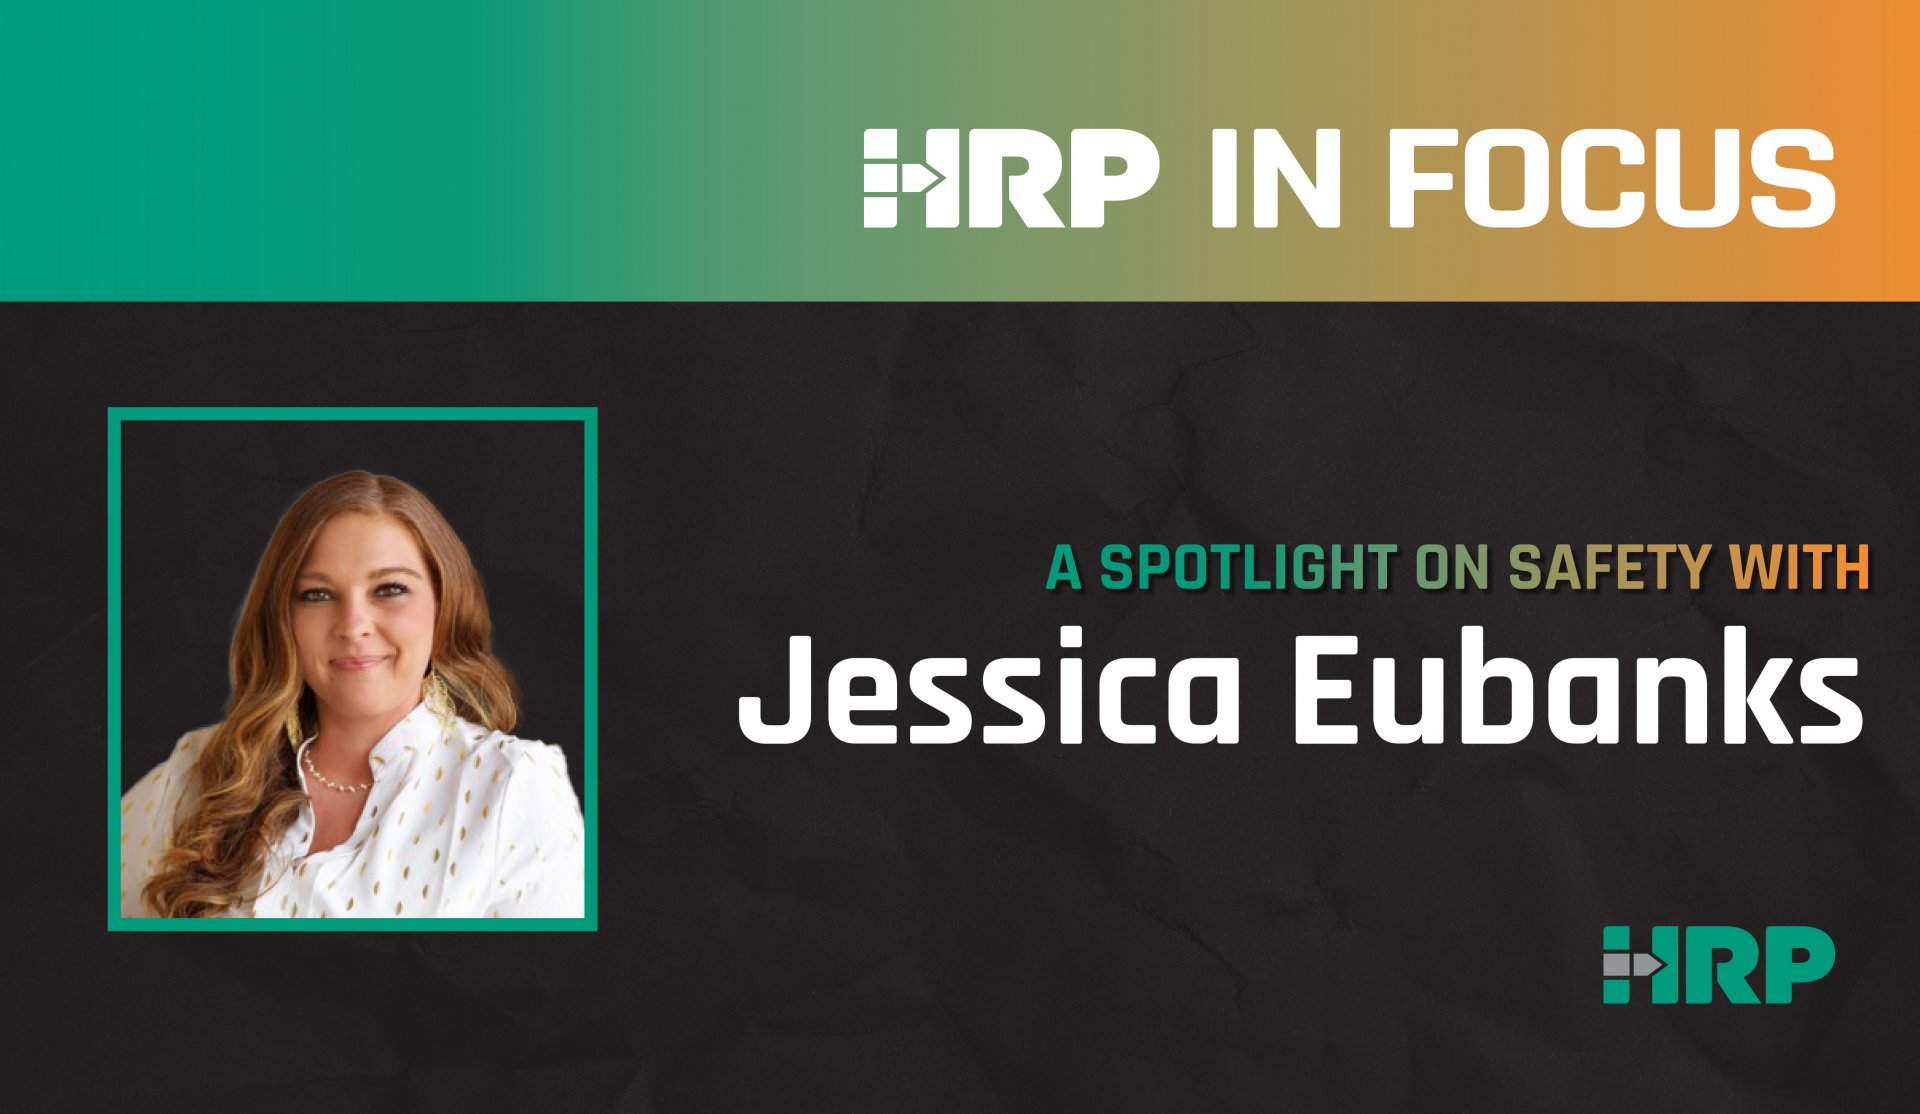 HRP in Focus: A Spotlight on Safety with Jessica Eubanks